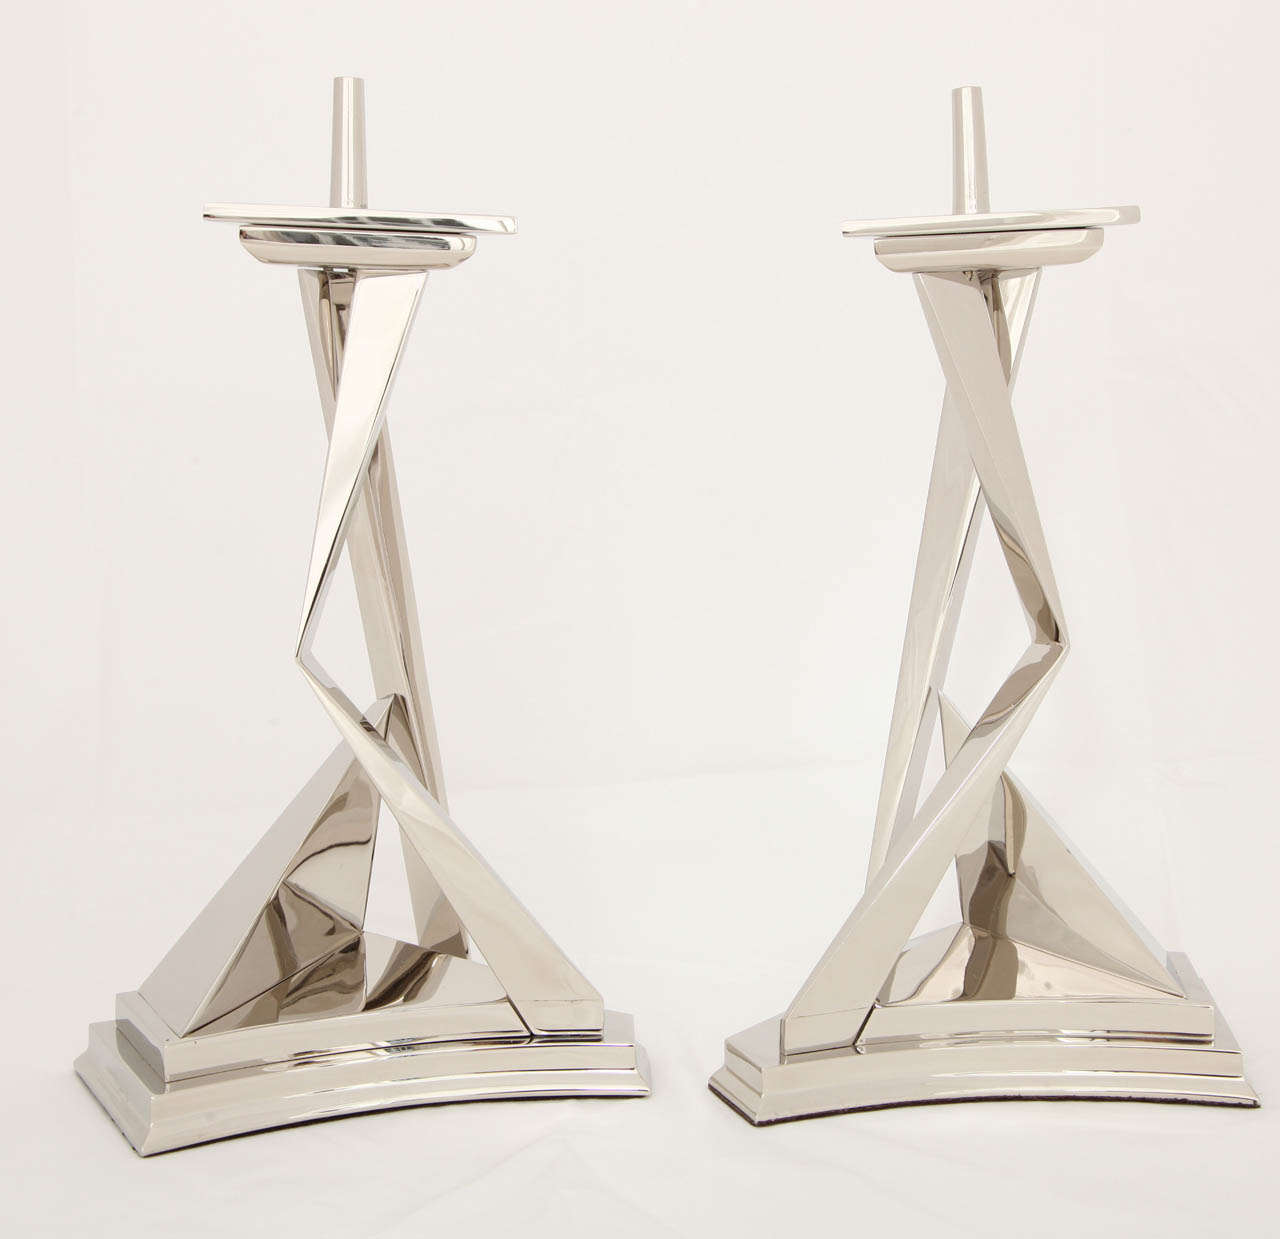 A pair of nickel-plated bronze candlesticks, 